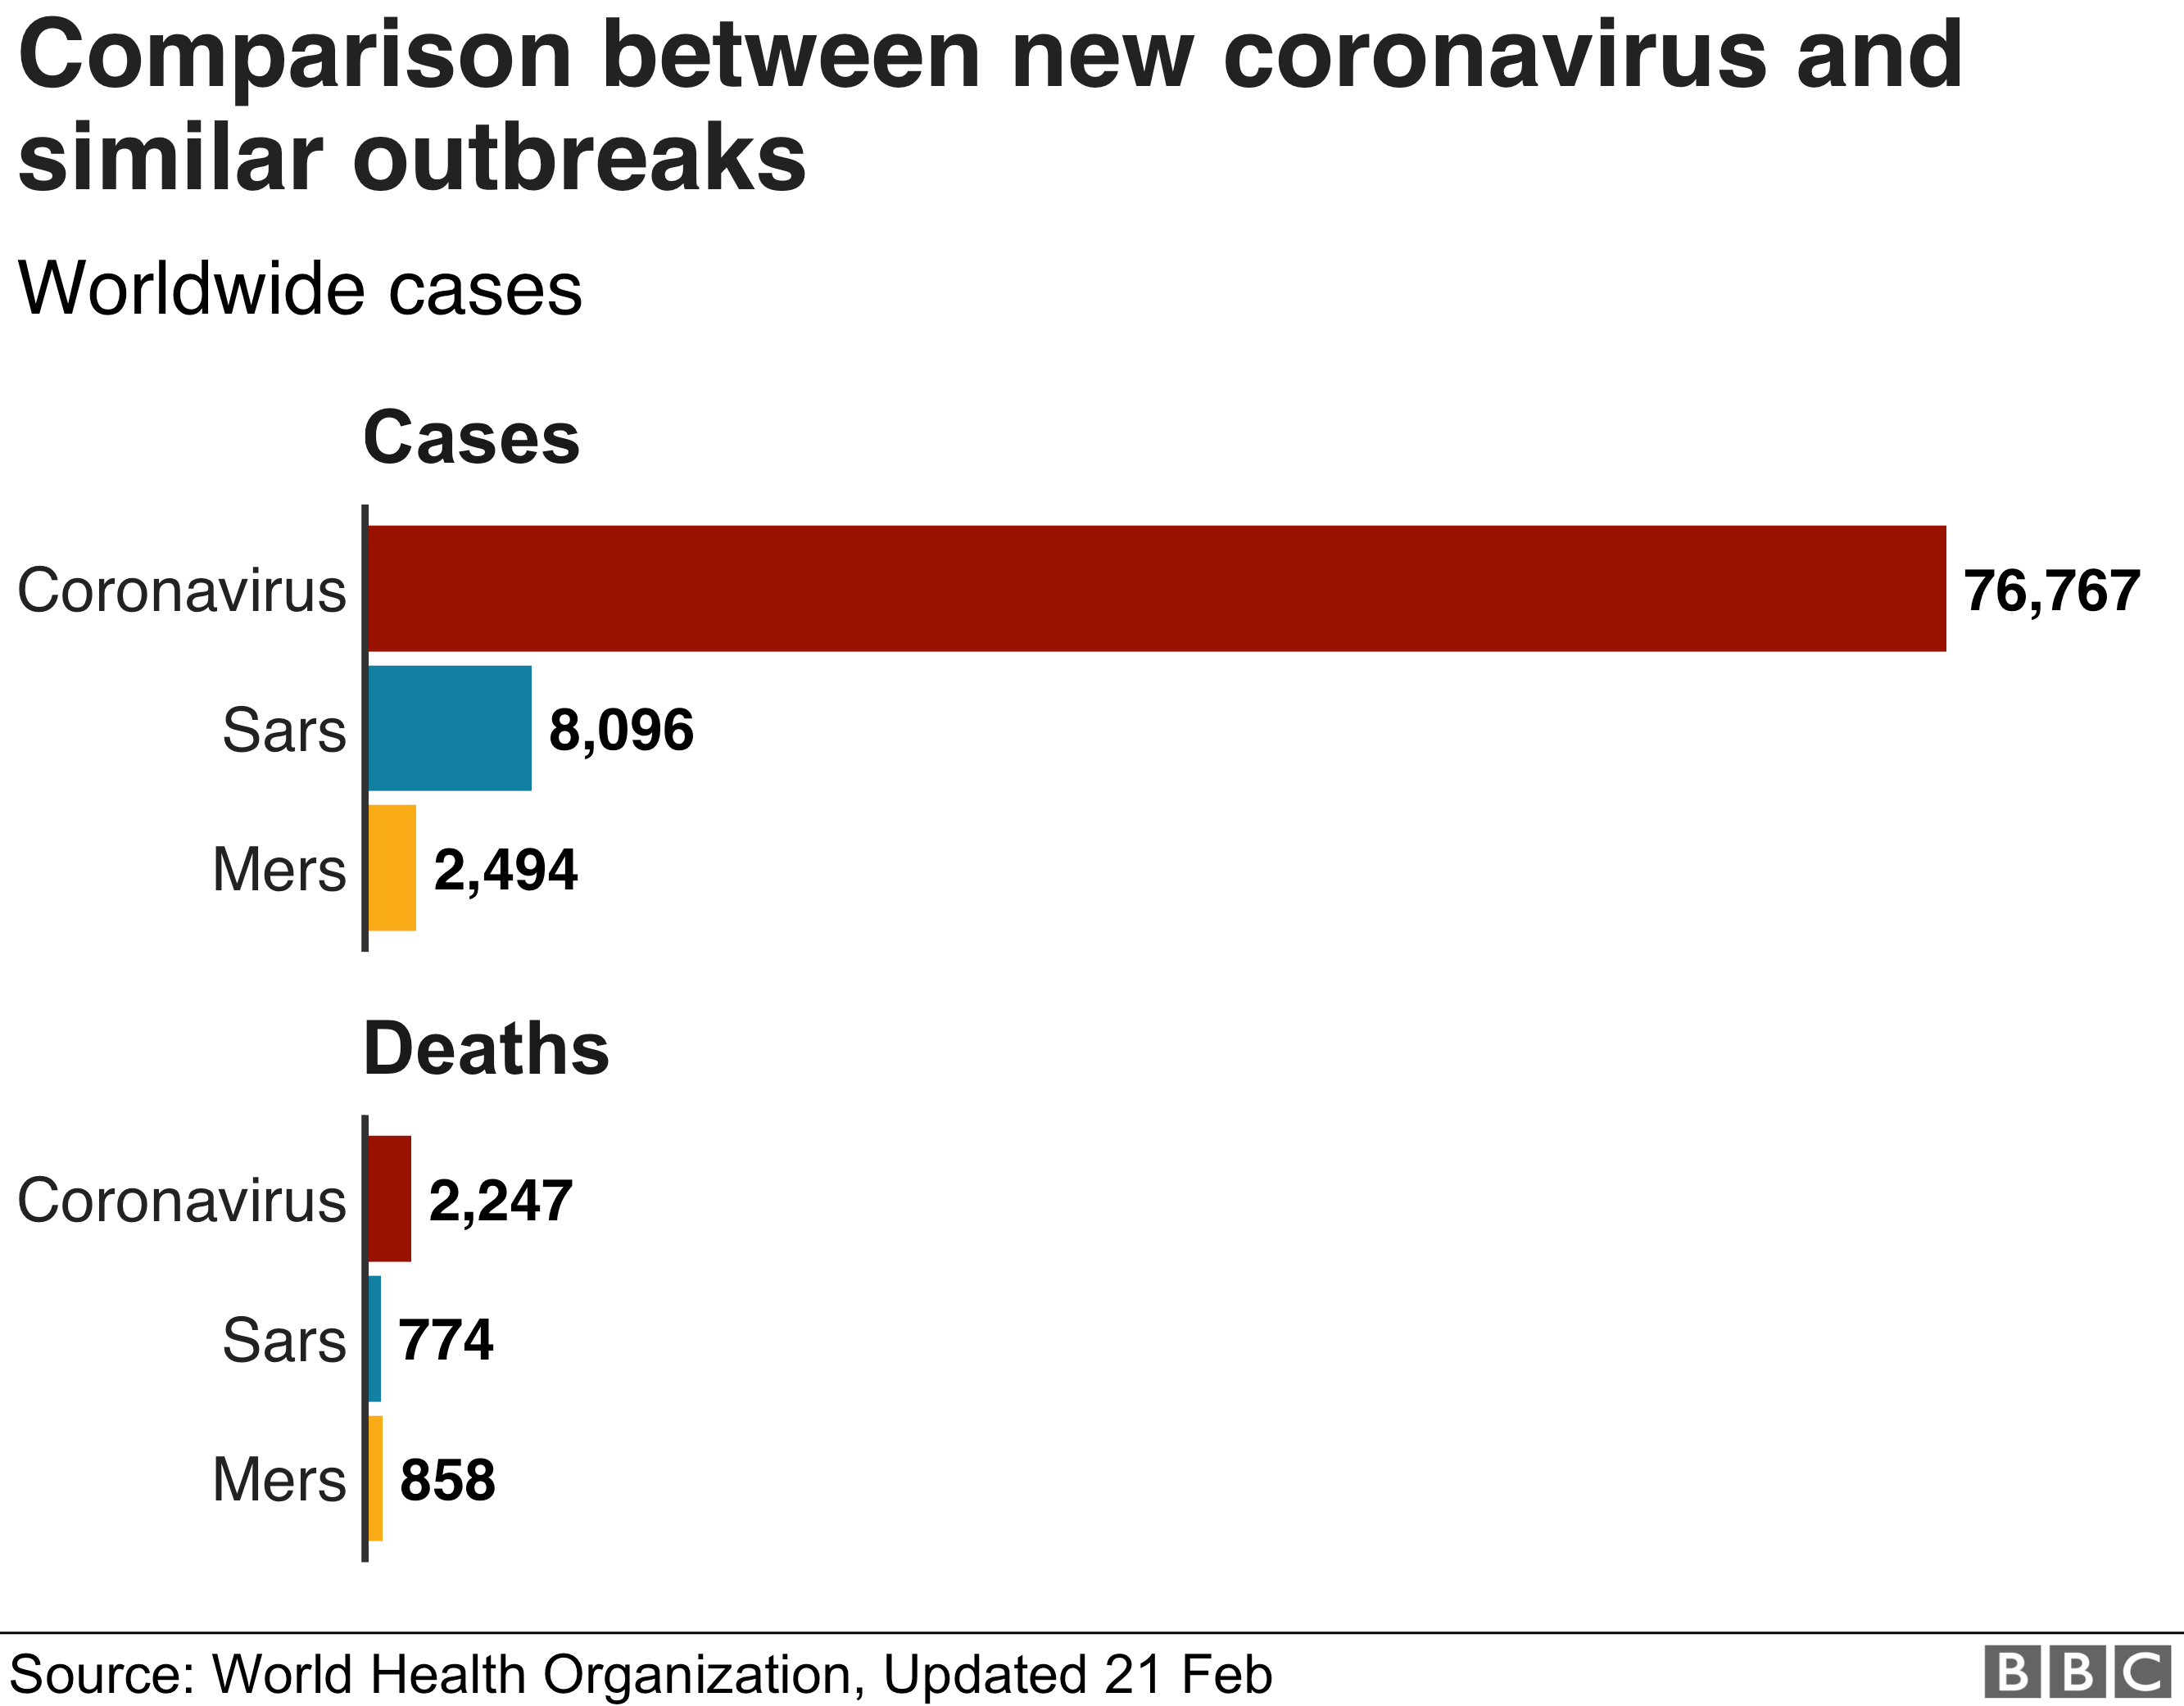 There have been many more cases and deaths when compared to SARS and MERS